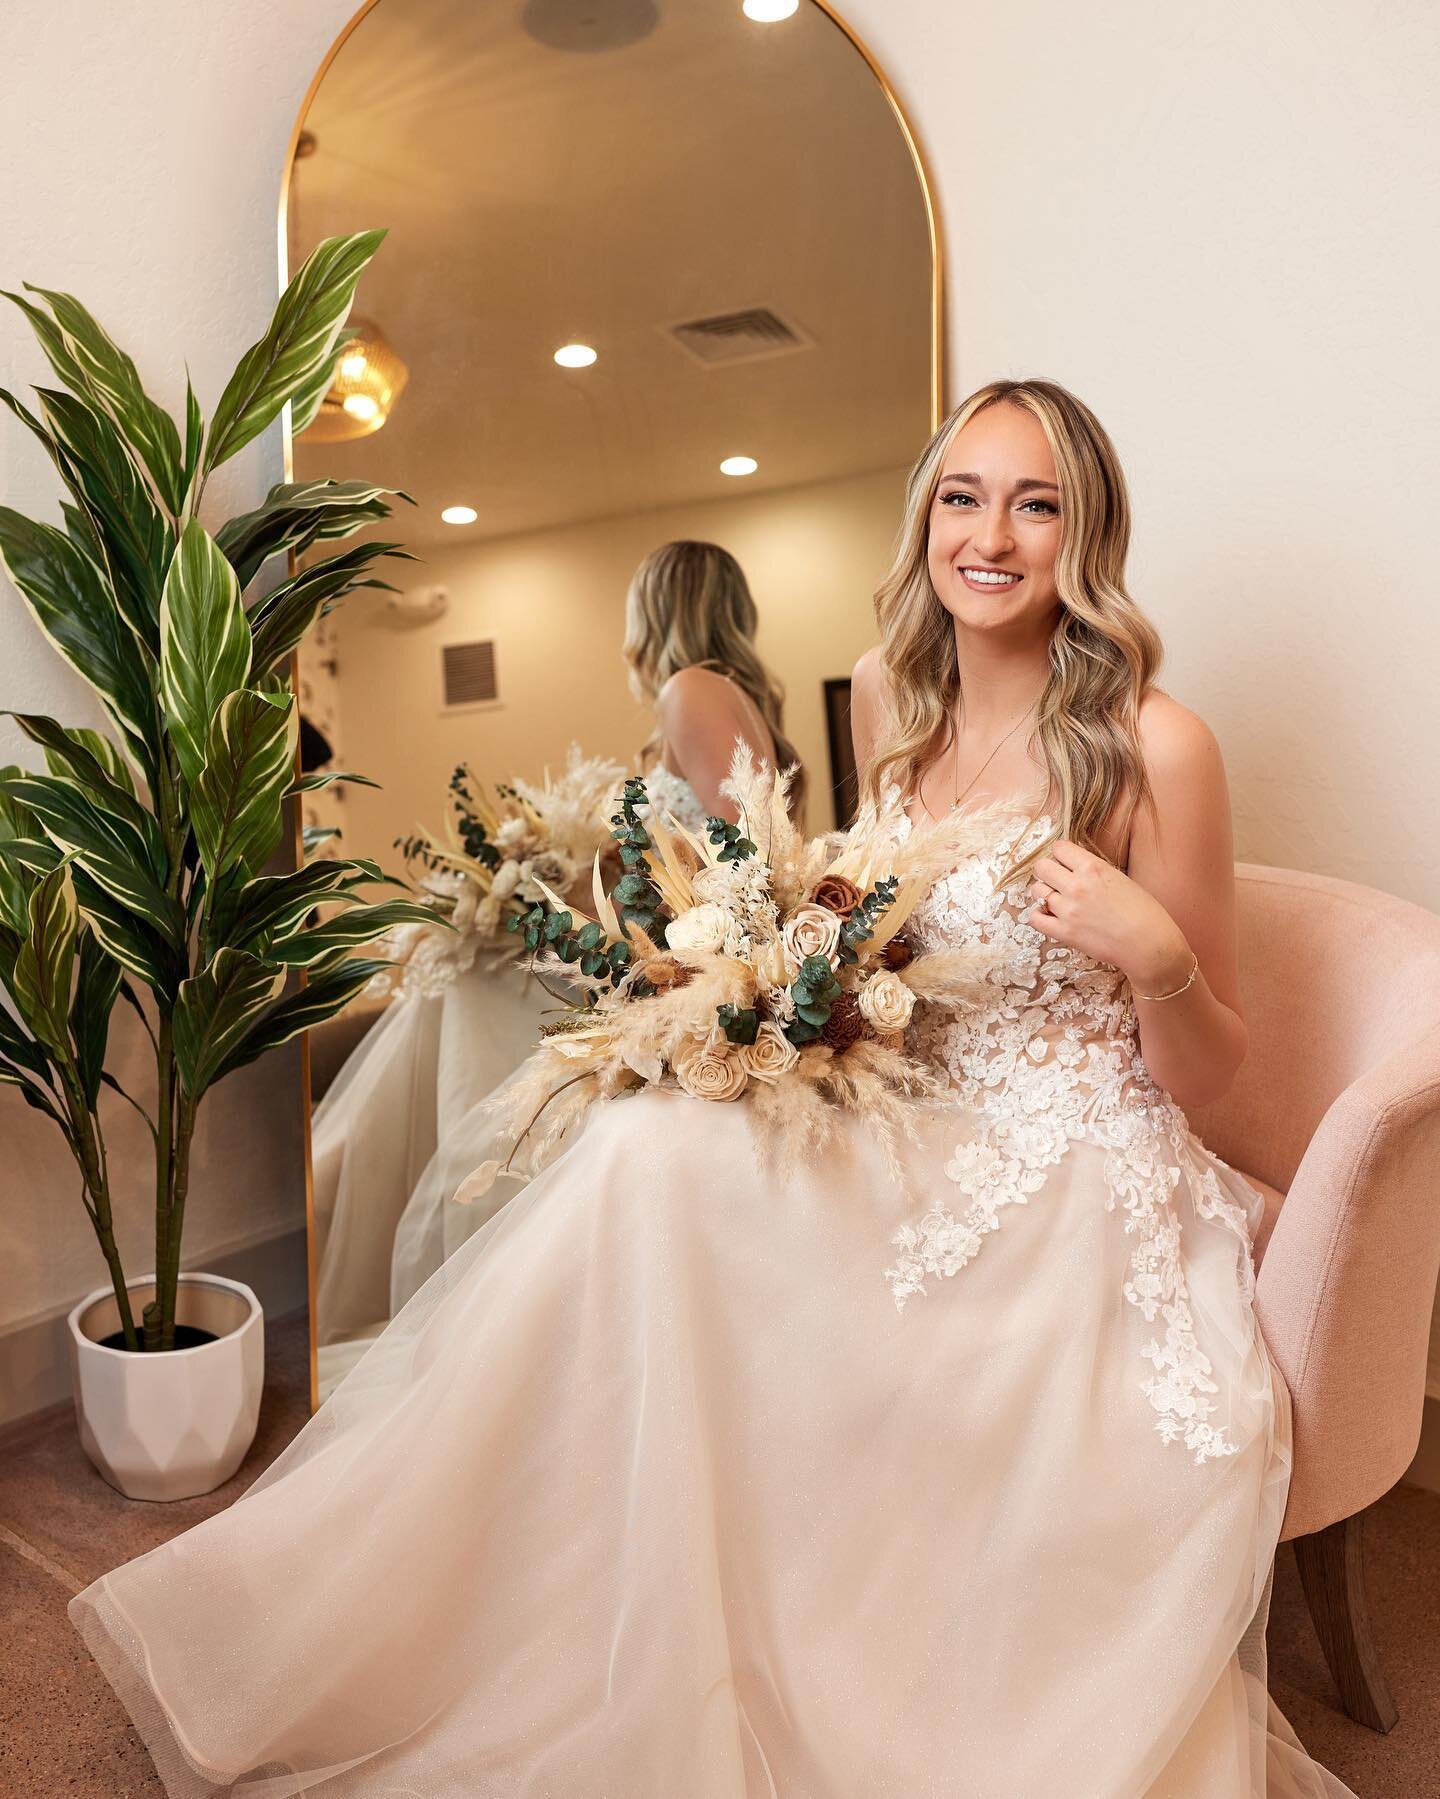 The sweetest bridal suite moments✨

pc: @lauralynnrhodephotography